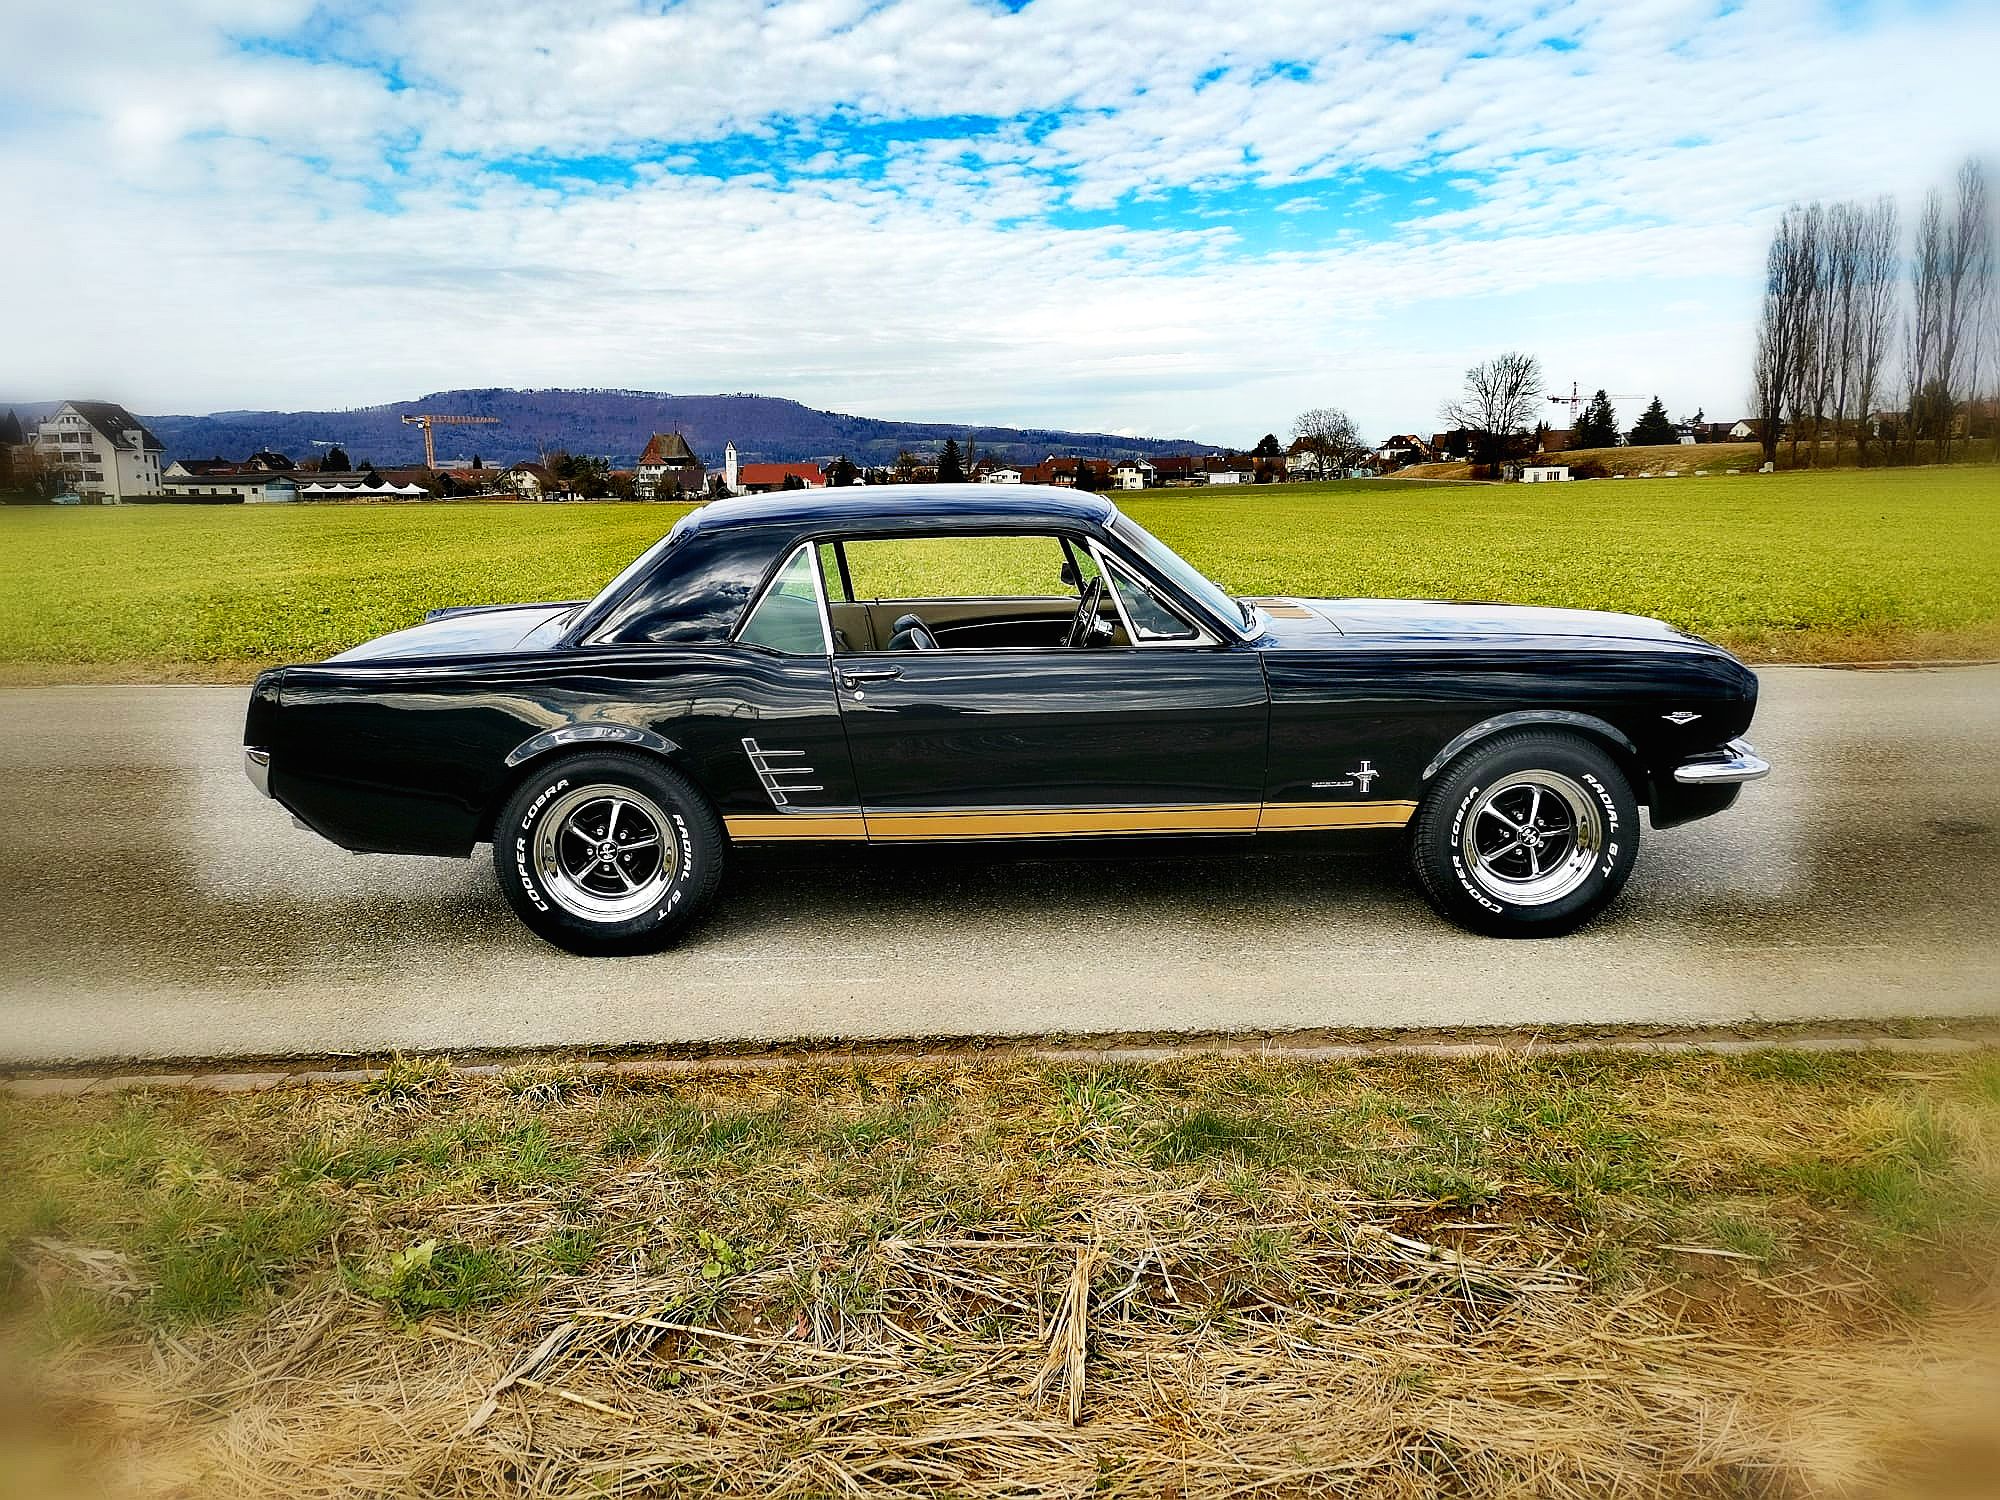 1966 Ford Mustang Coupé